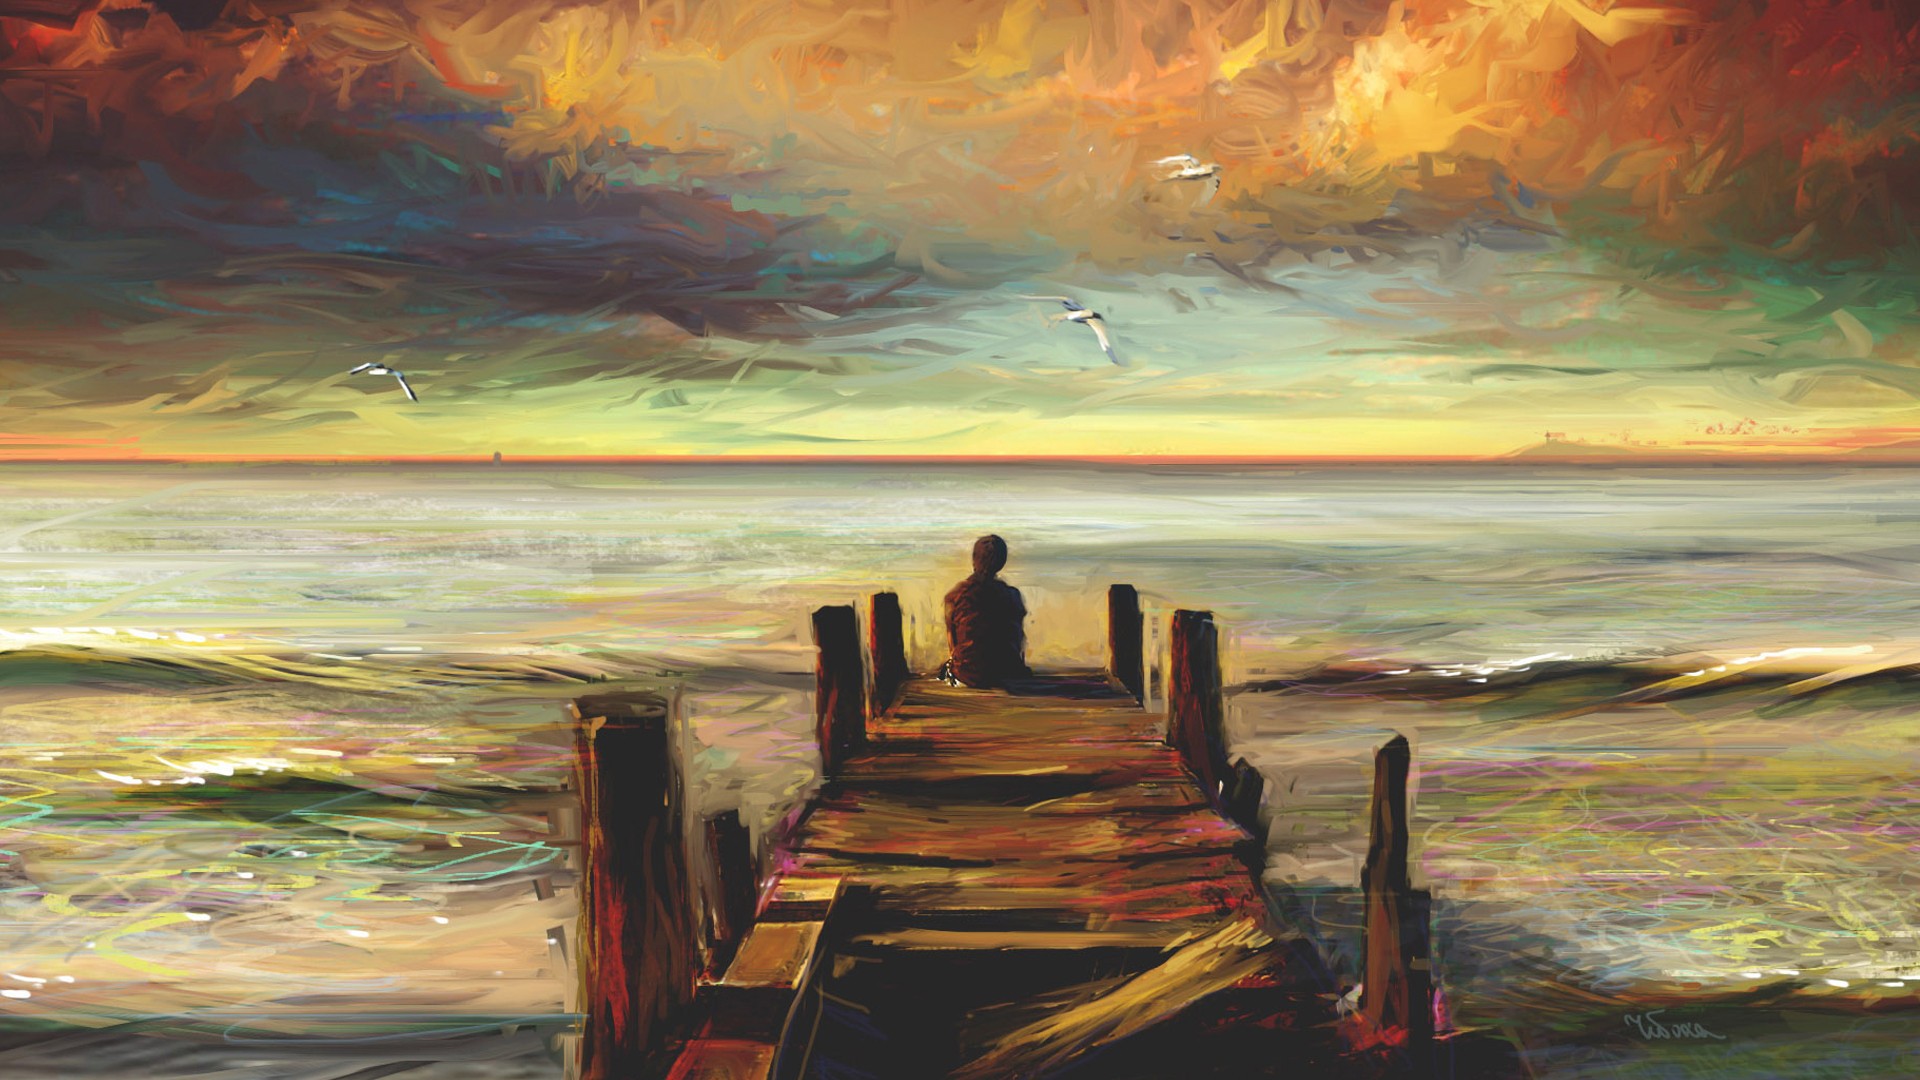 General 1920x1080 pier artwork painting sky sea solice waves brown seagulls wooden surface looking into the distance wood